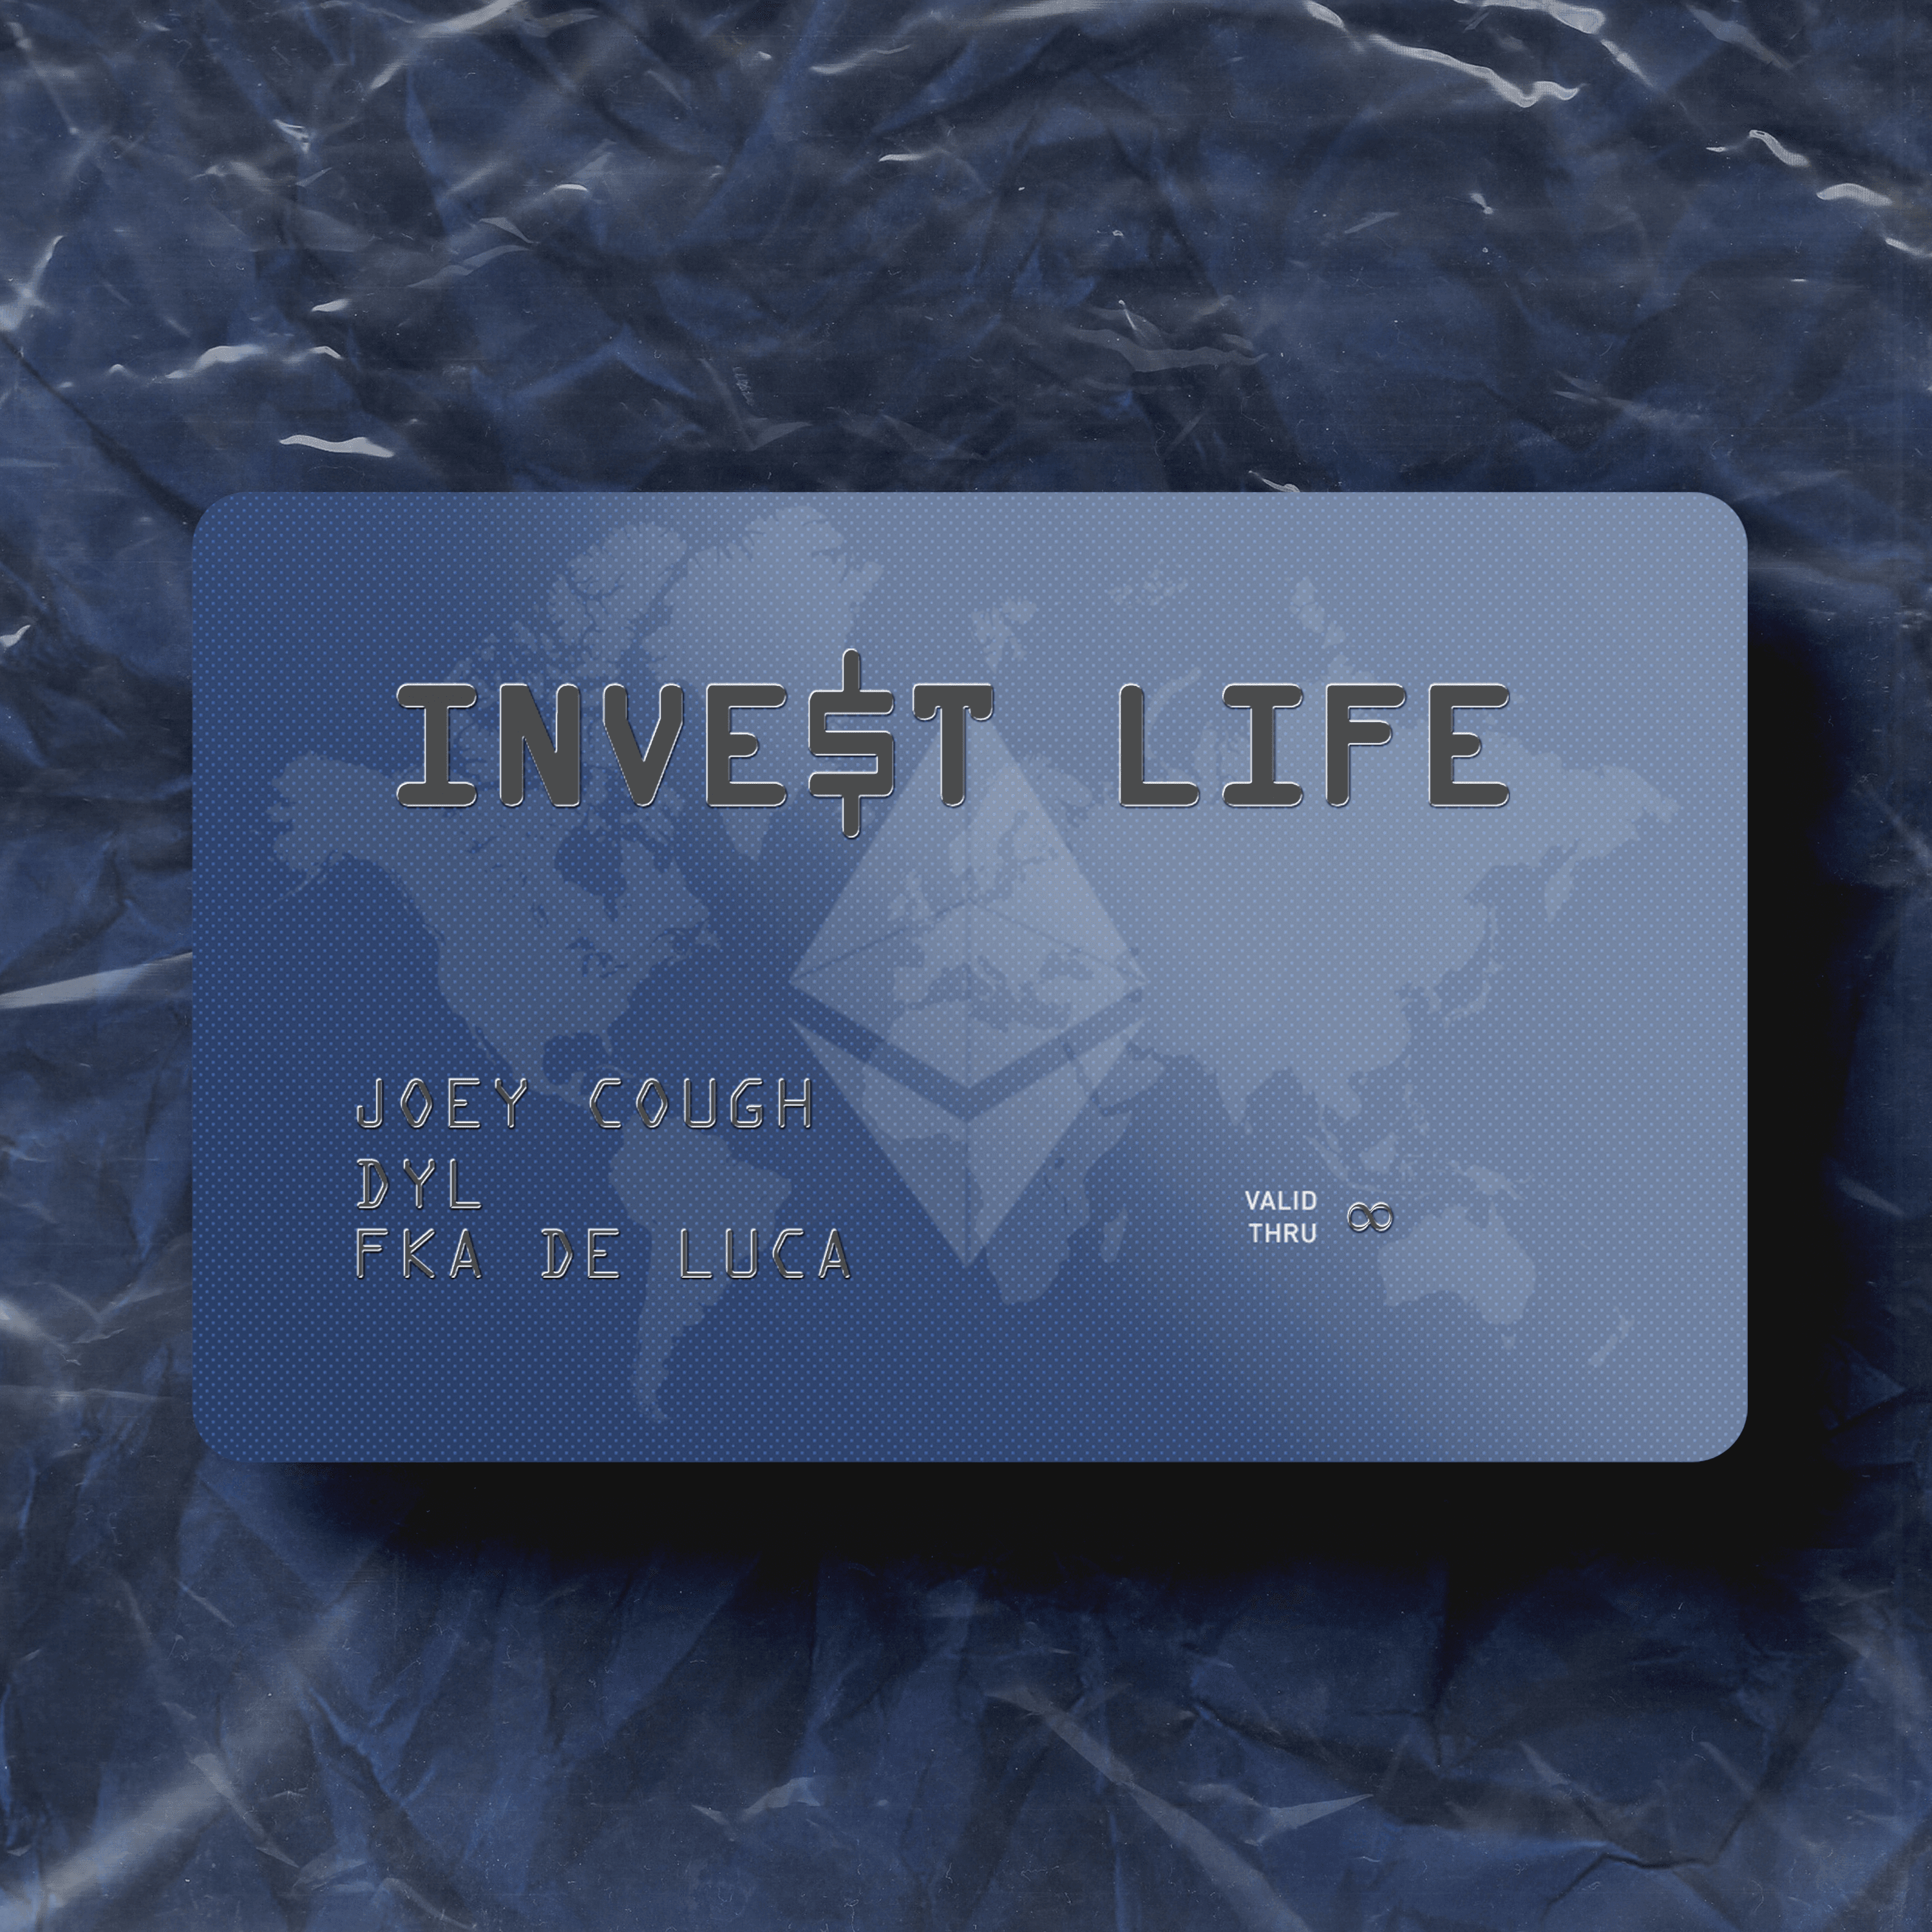 Invest Life (feat. Dyl and FKA De Luca) by Joey Cough 41/50